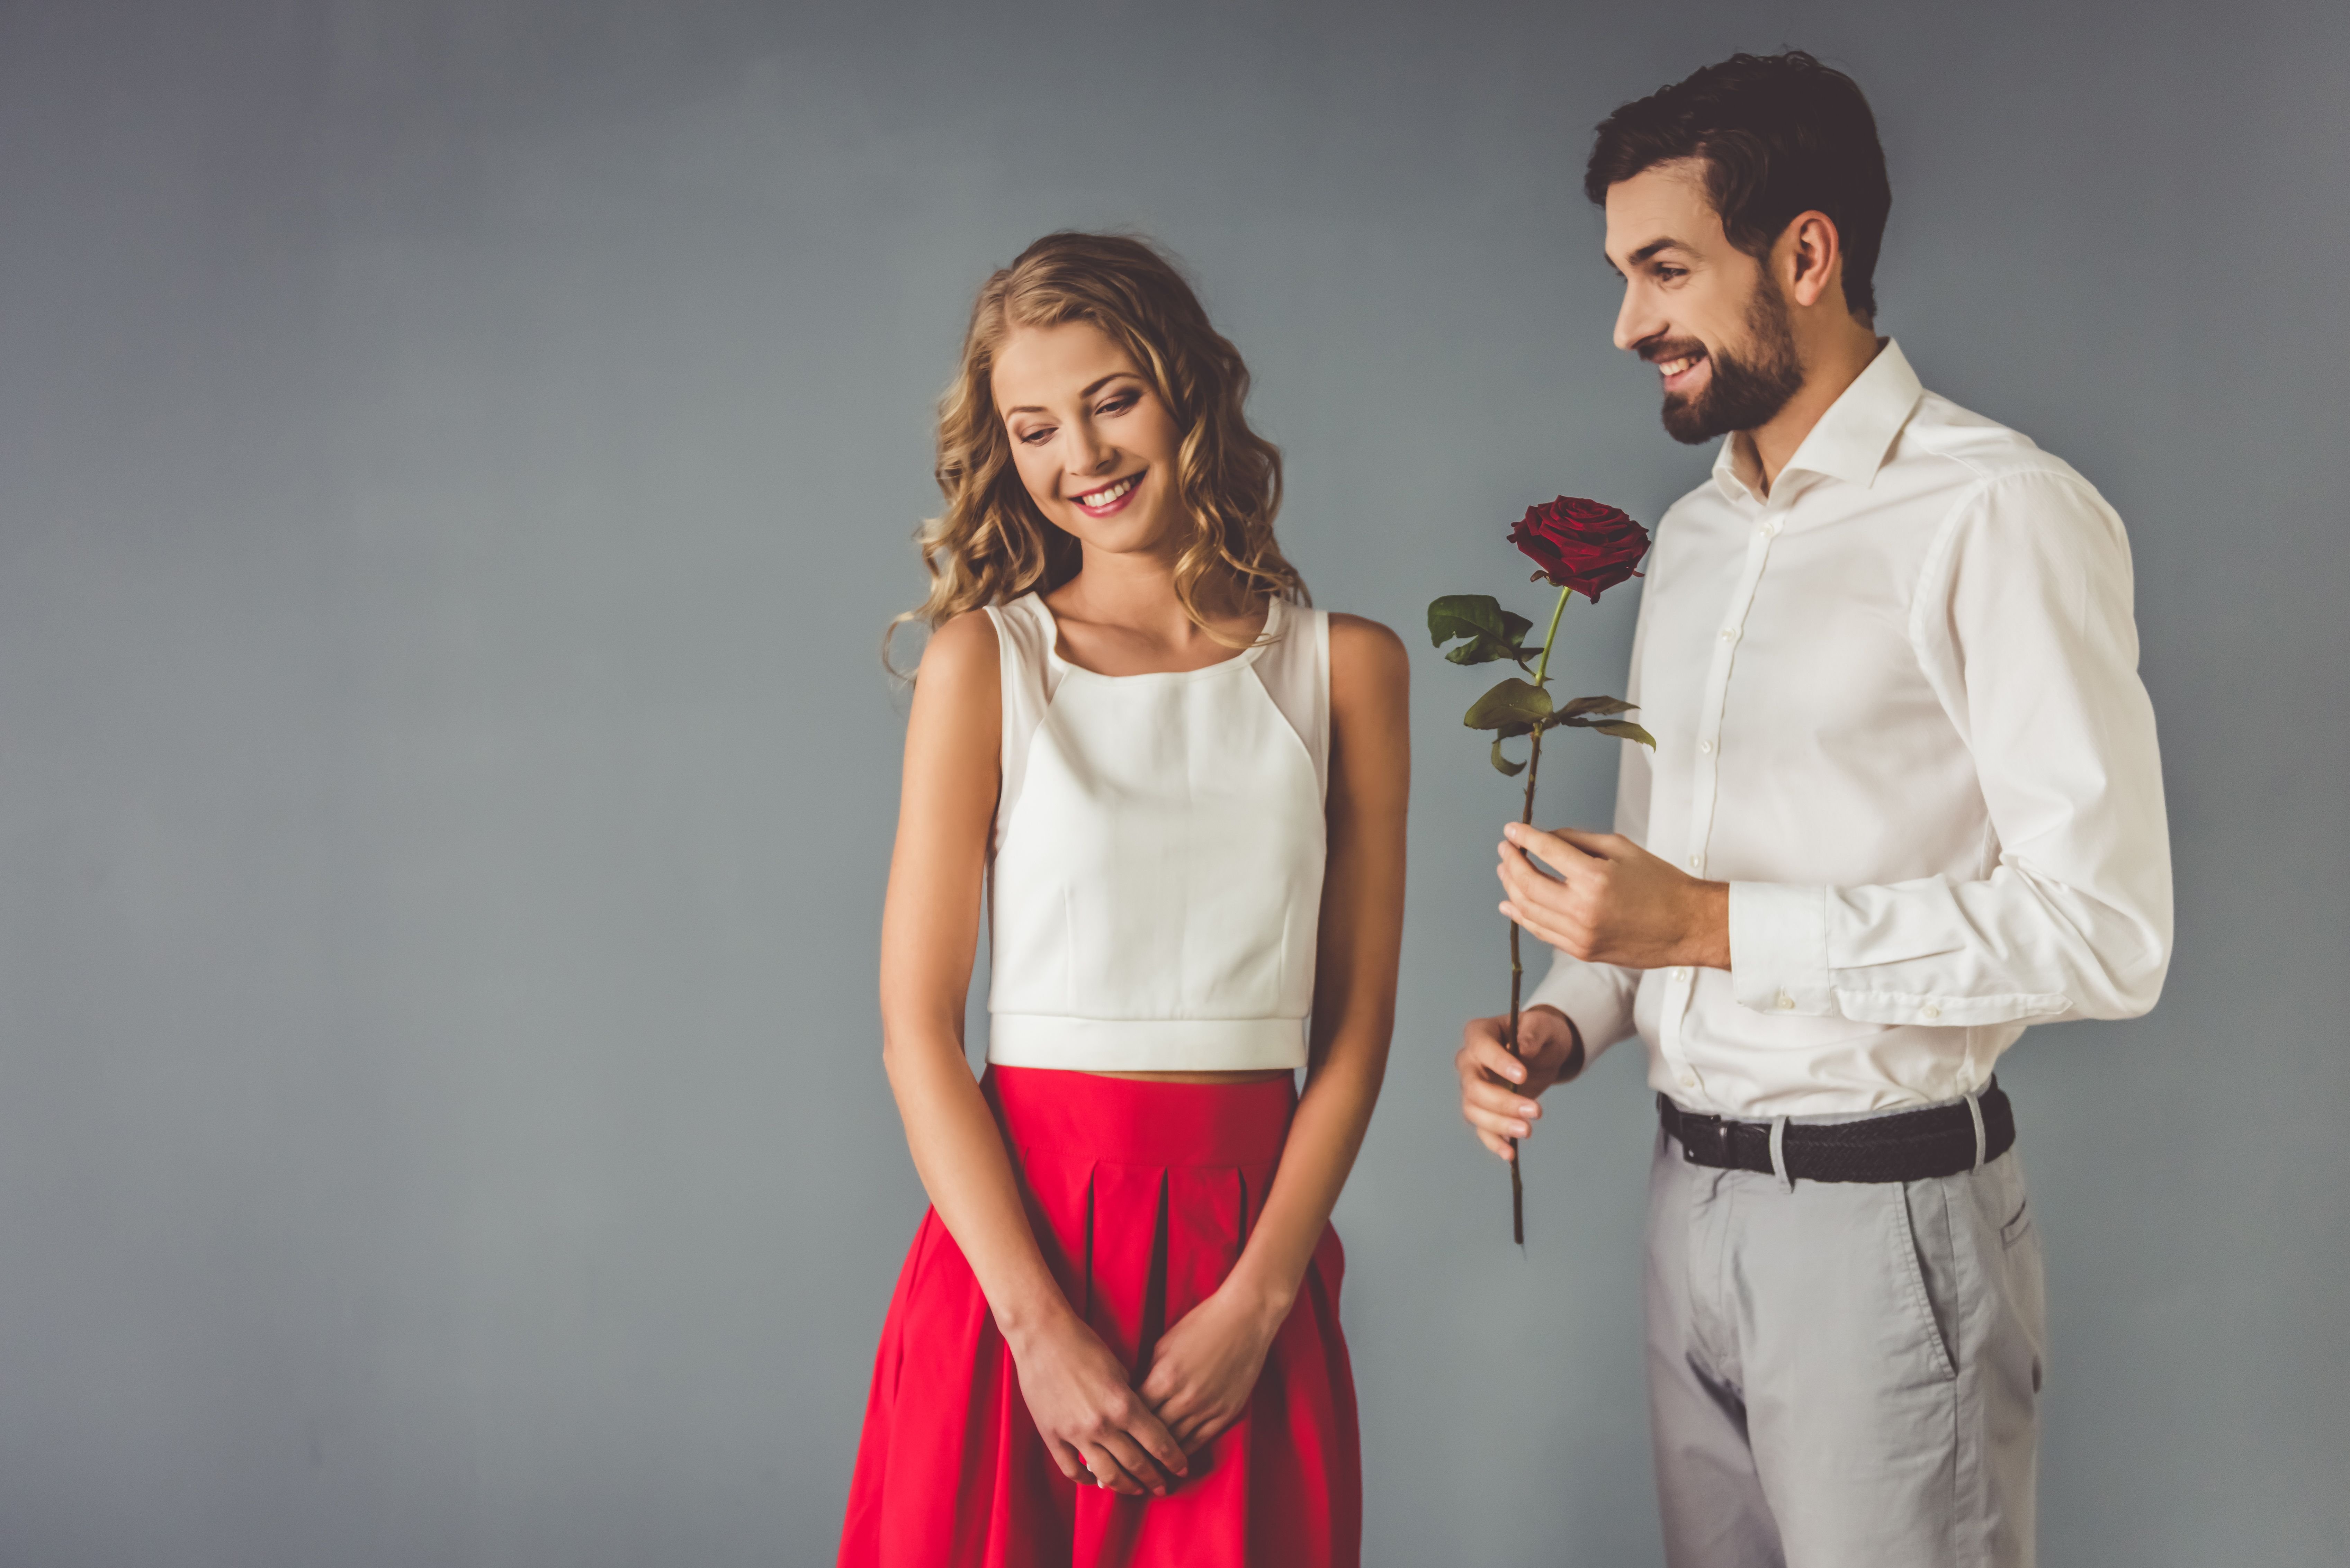 A man gives a woman red flowers.| Source: Shutterstock